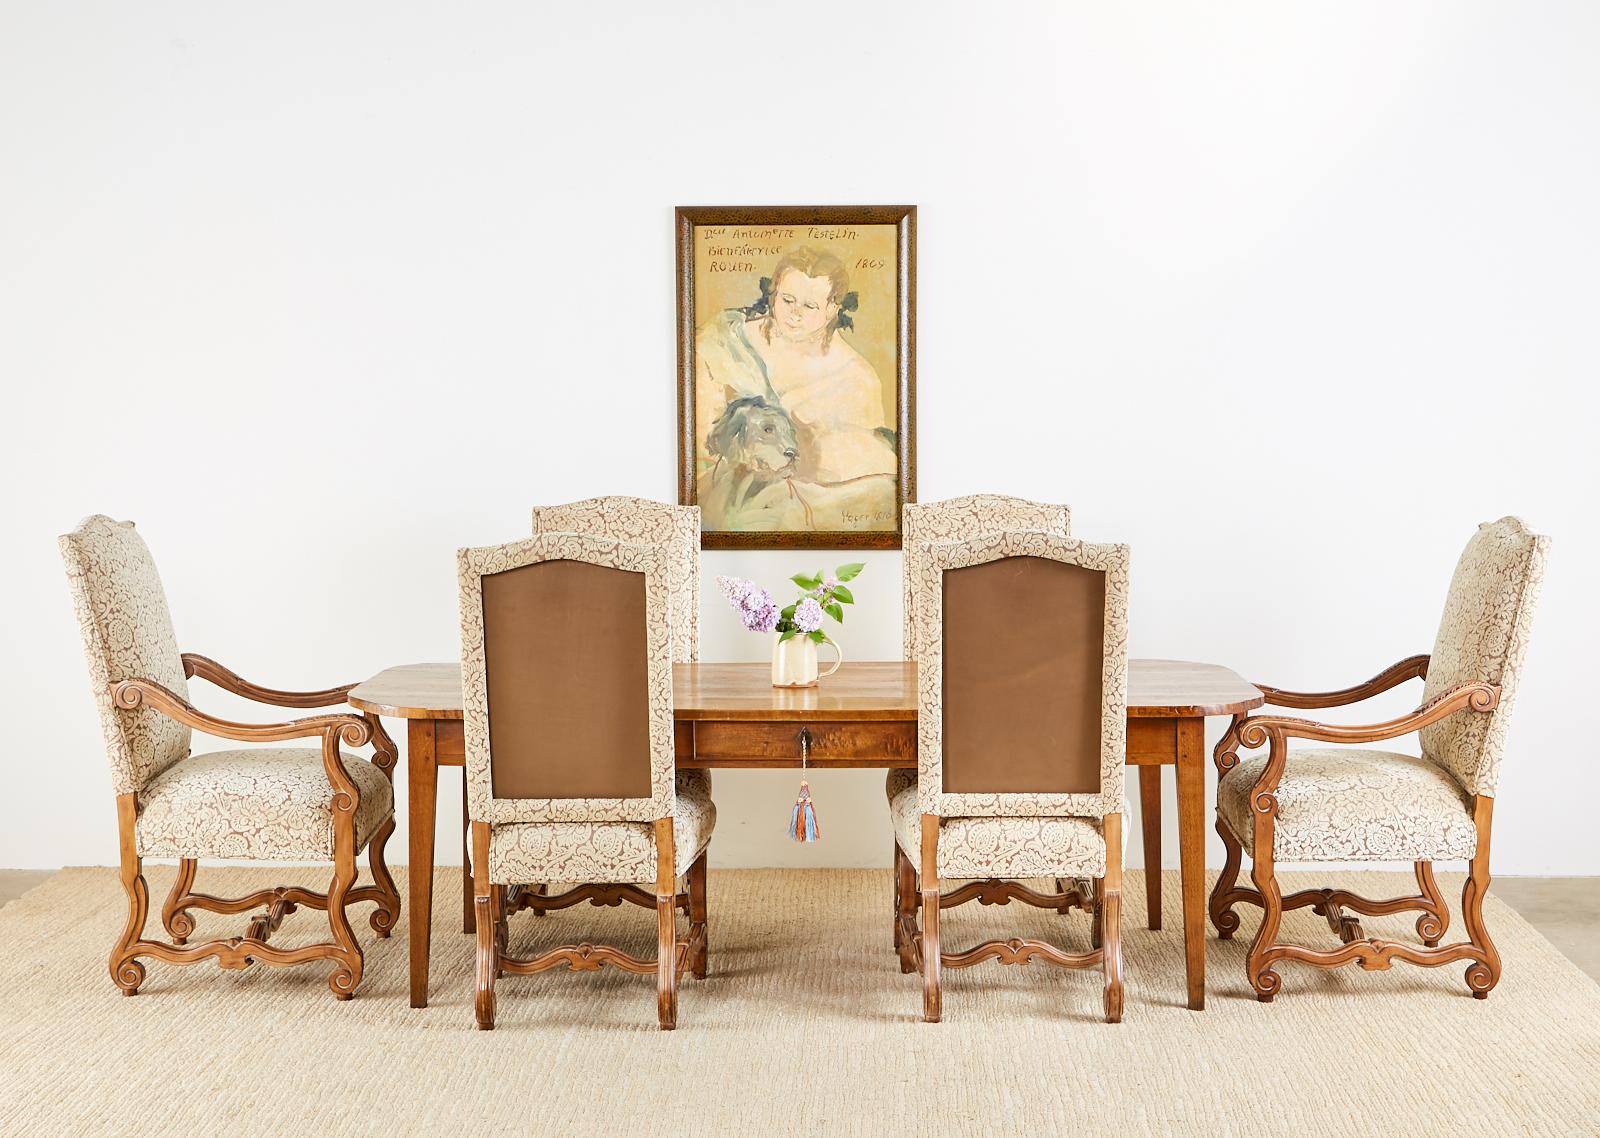 Wonderful set of ten handvcarved hardwood dining chairs by Kreiss. Made in the French Louis XIV Os De Mouton style known as the 